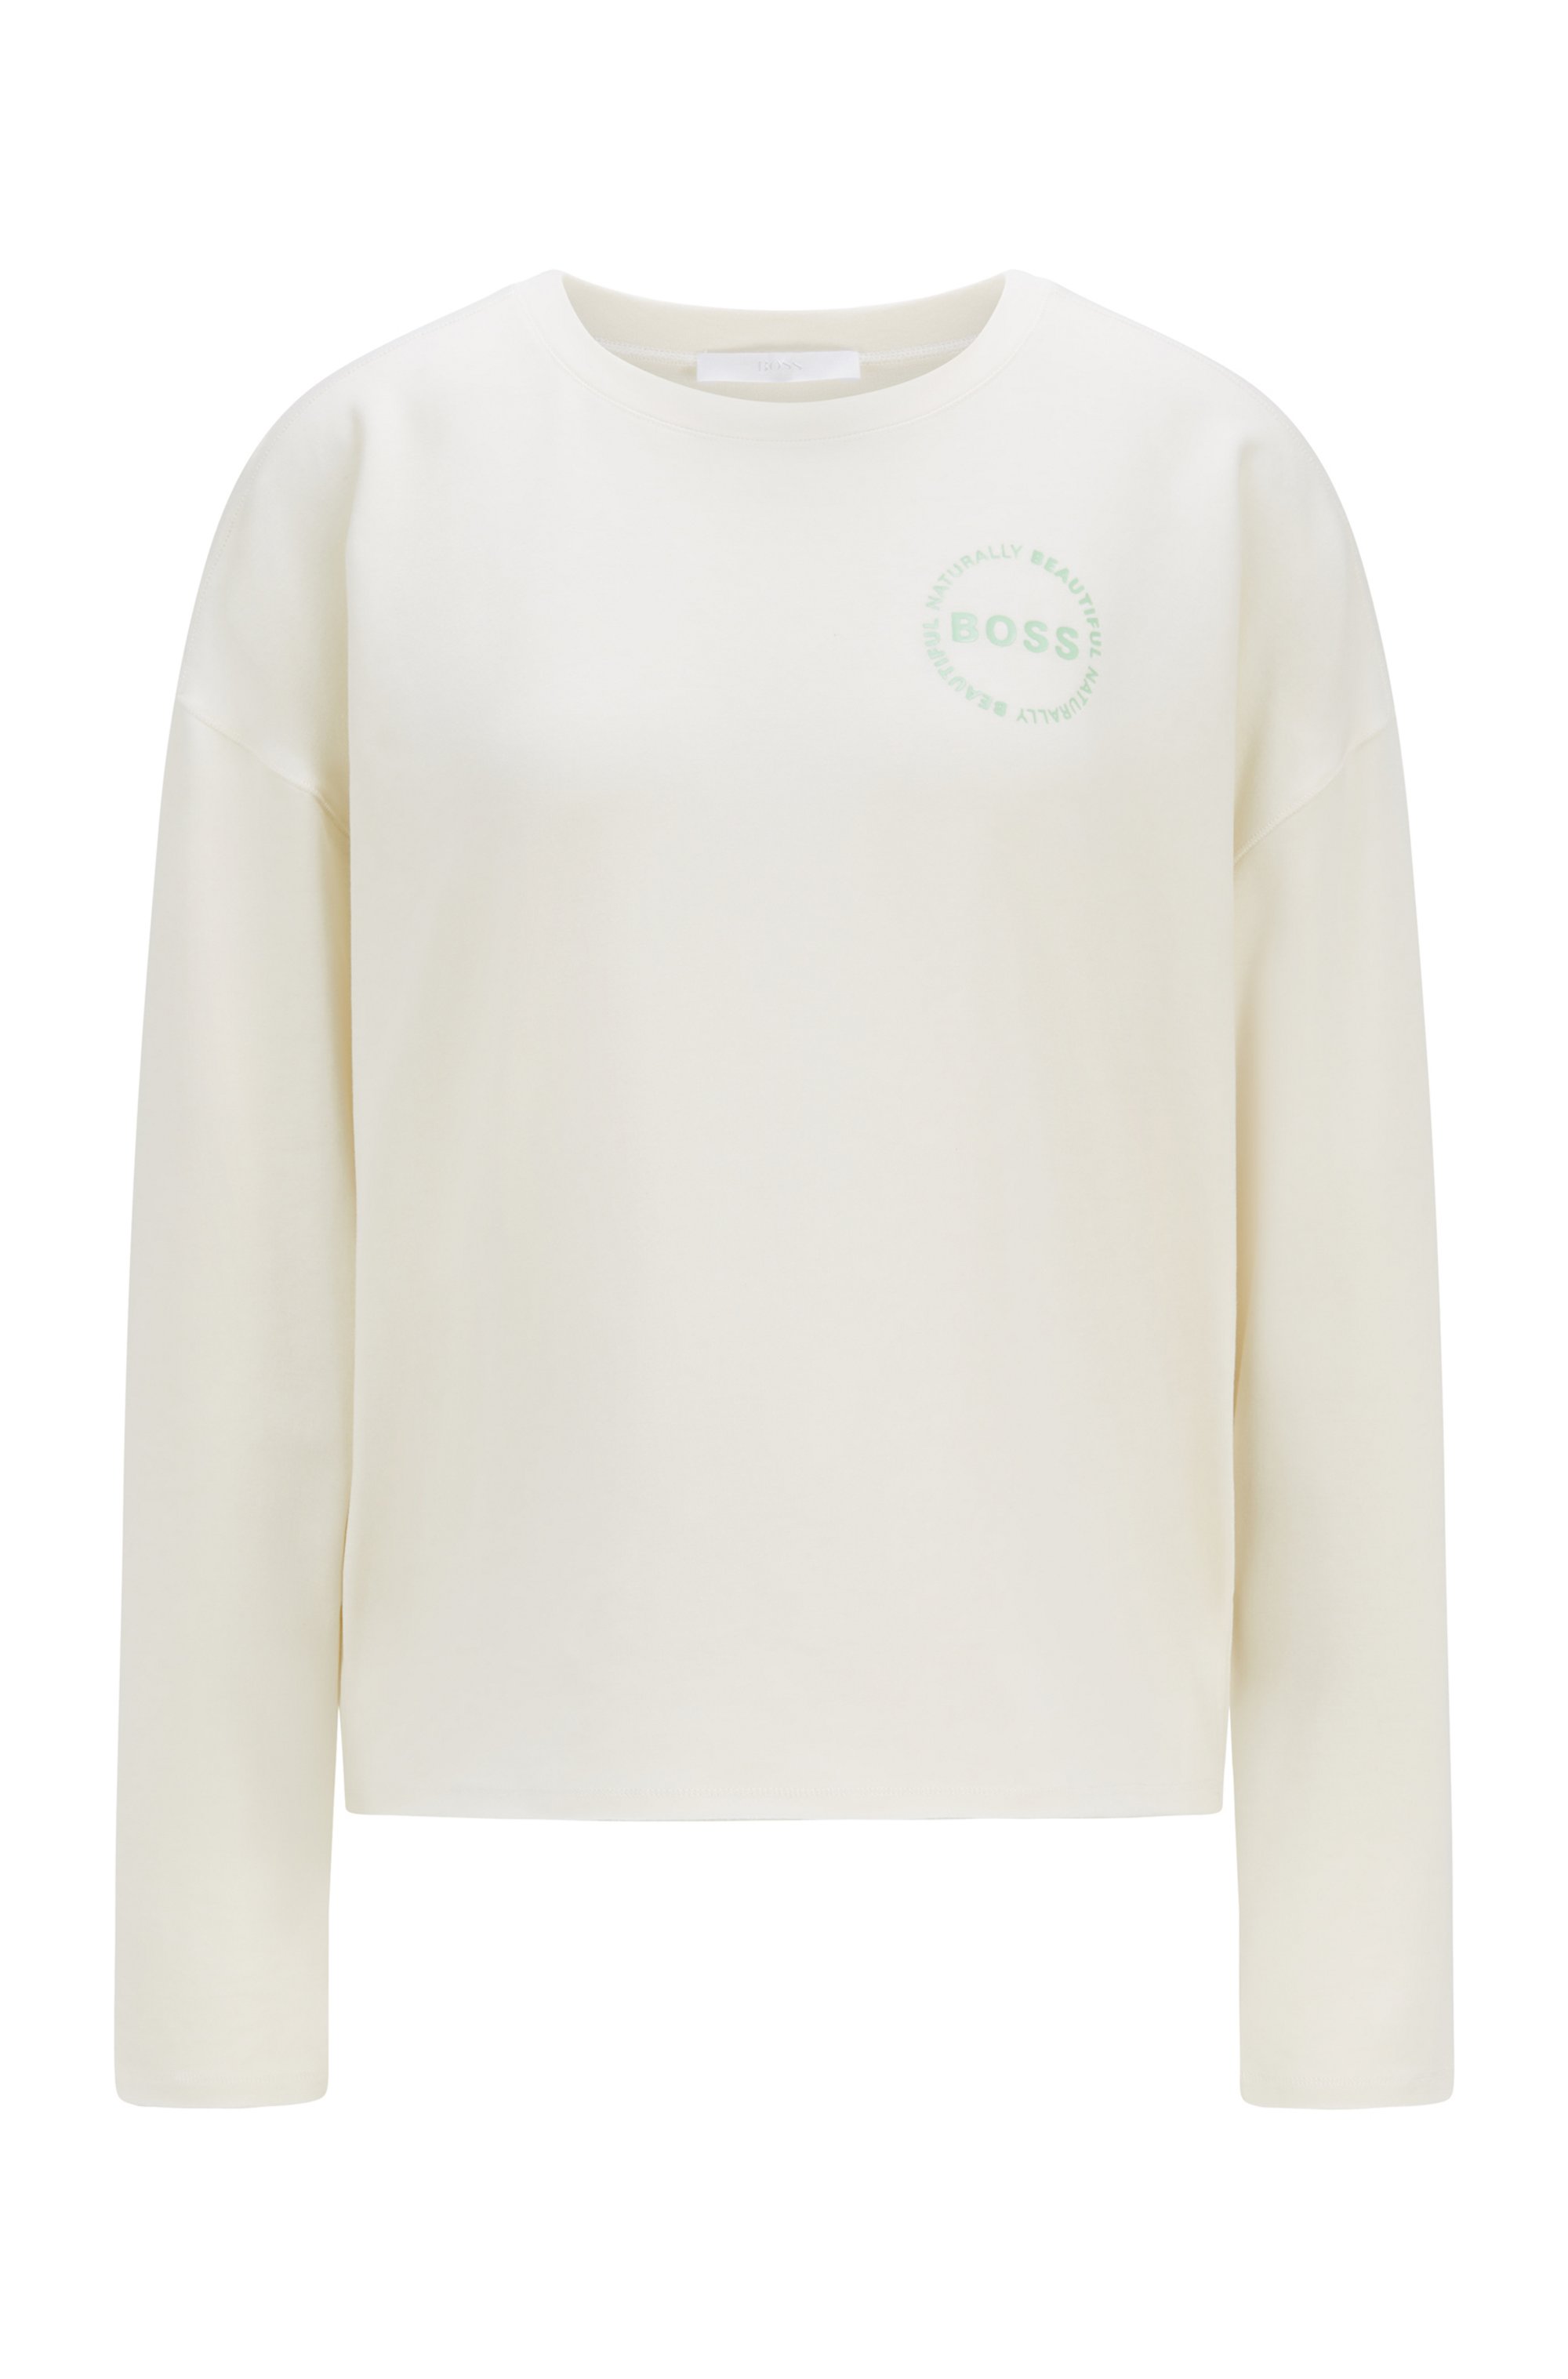 Long-sleeved T-shirt in lightweight terry, White